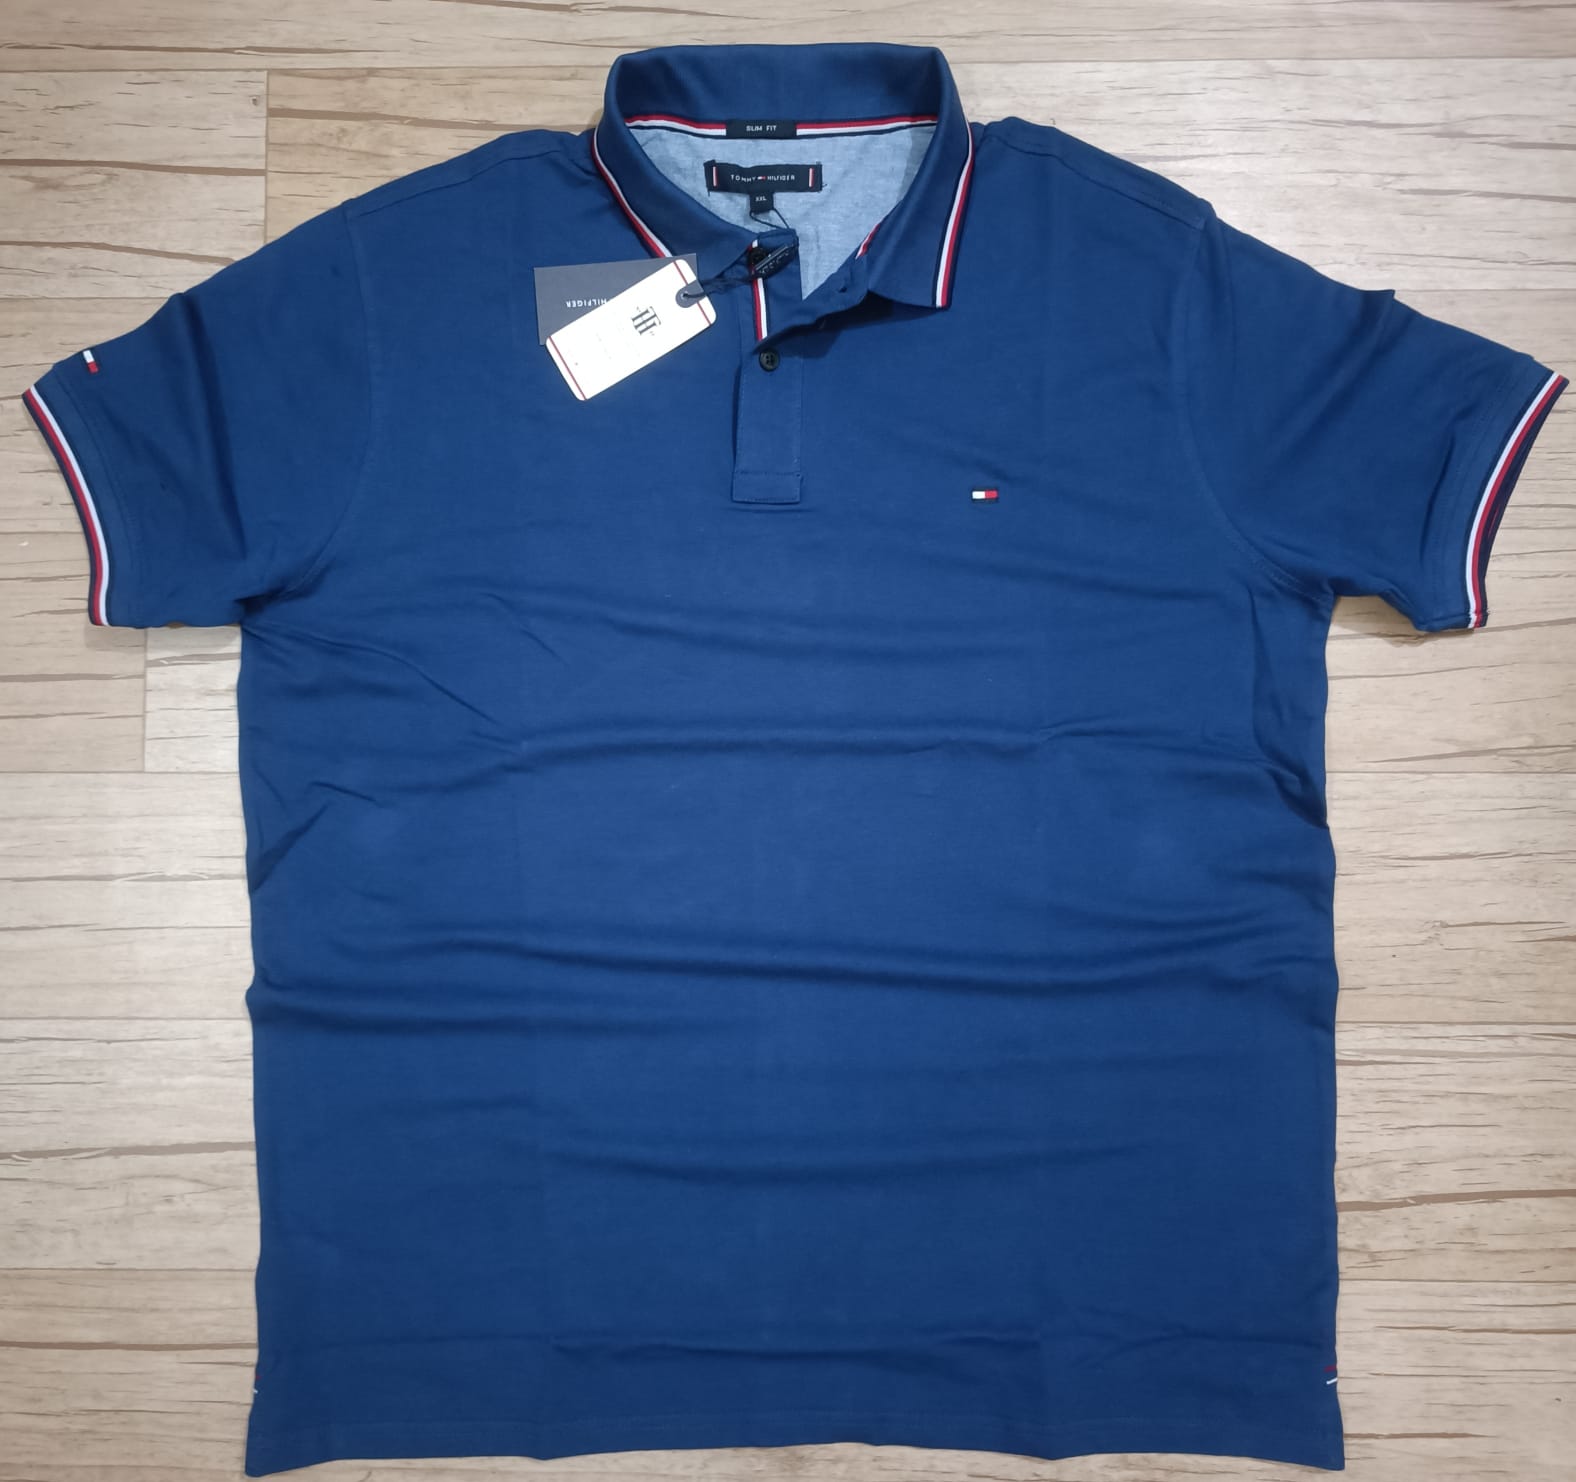 Imported Super Premium Cotton Polo Shirt For Men (ZAYSIPS12) - Blue